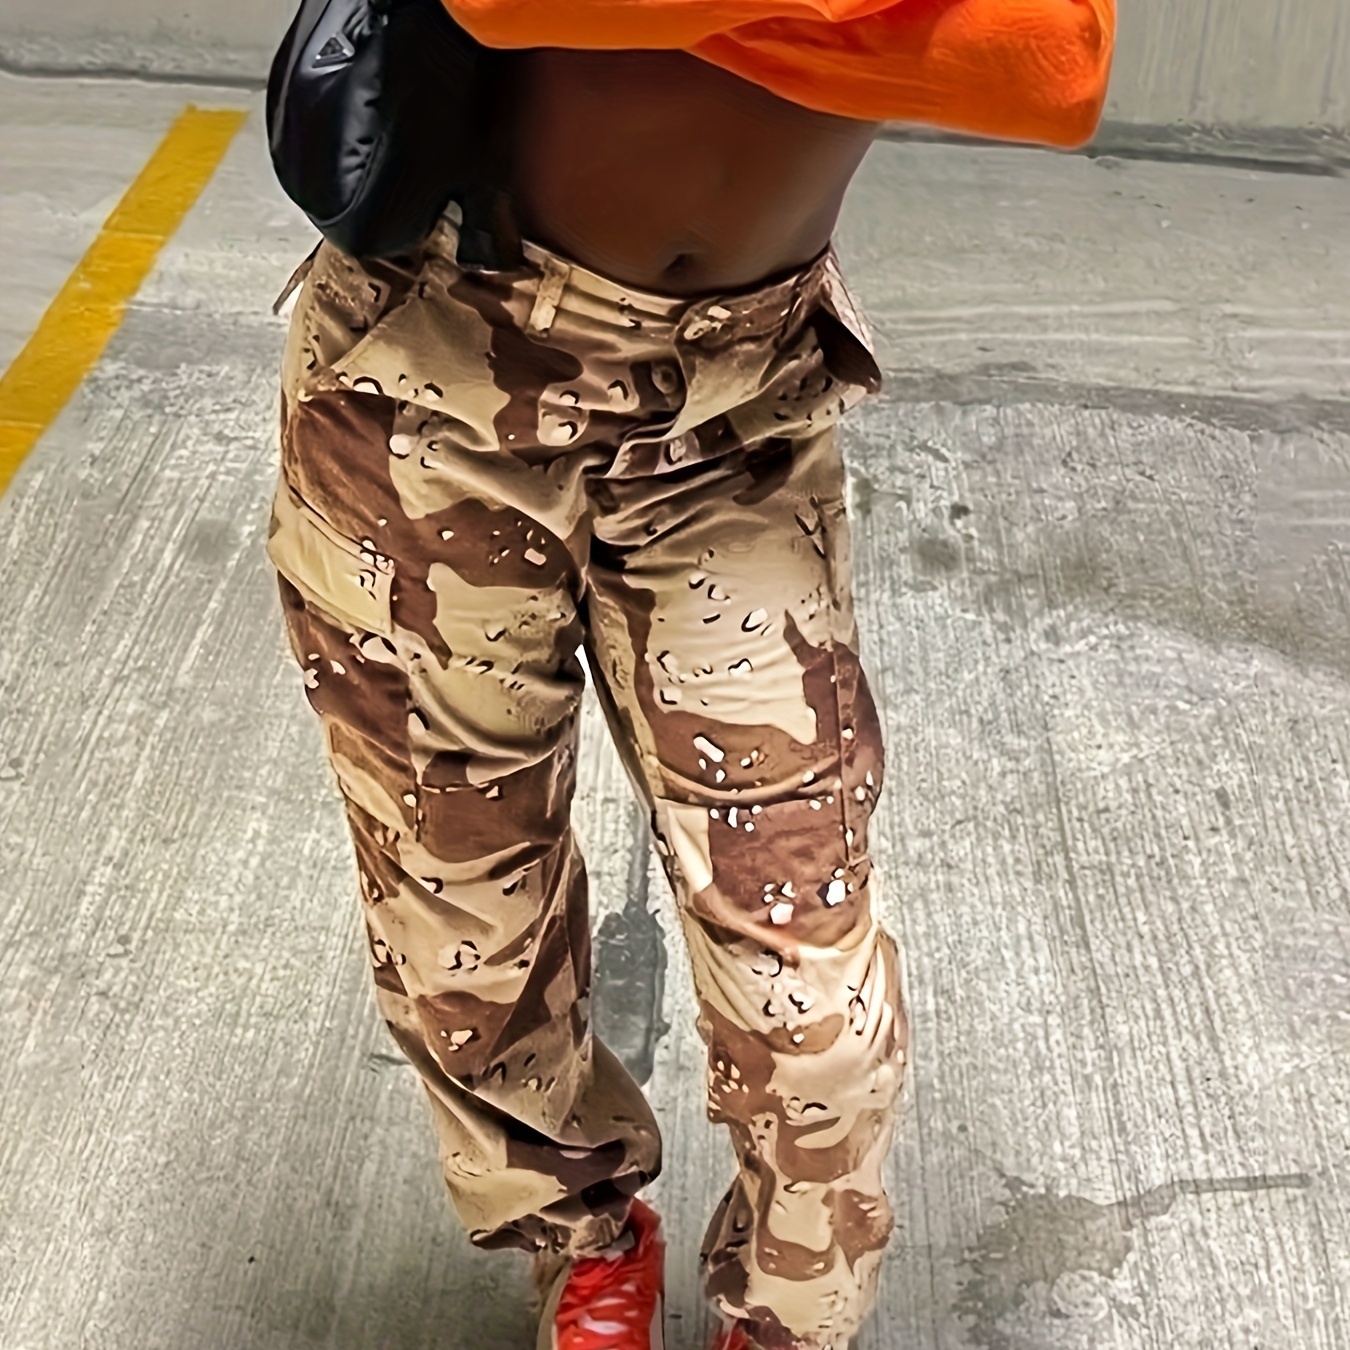 military pants for women